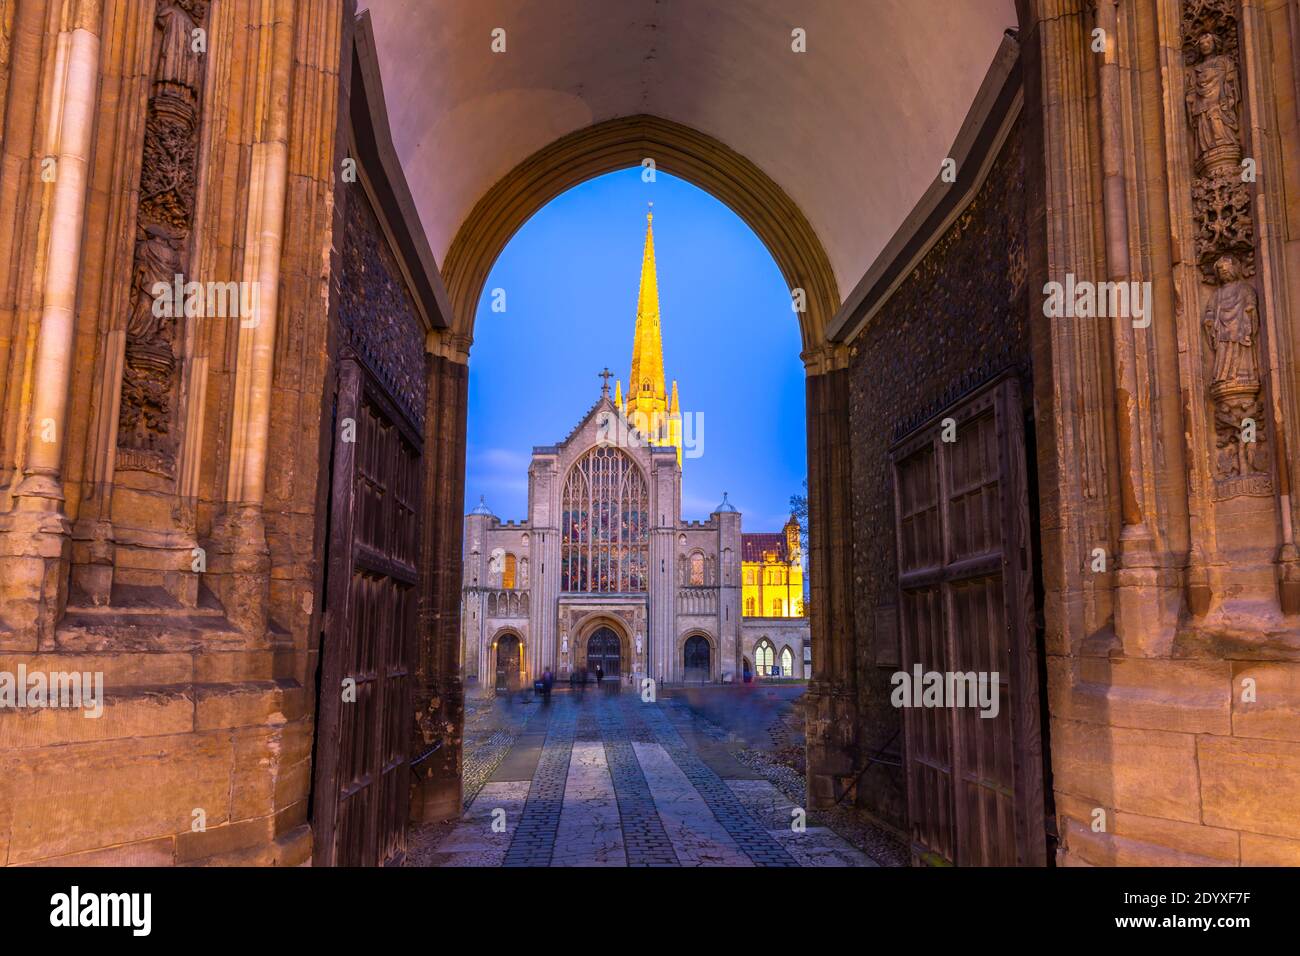 Norwich Cathedral viewed through arch at dusk, Norwich, Norfolk, East Anglia, England, United Kingdom, Europe Stock Photo